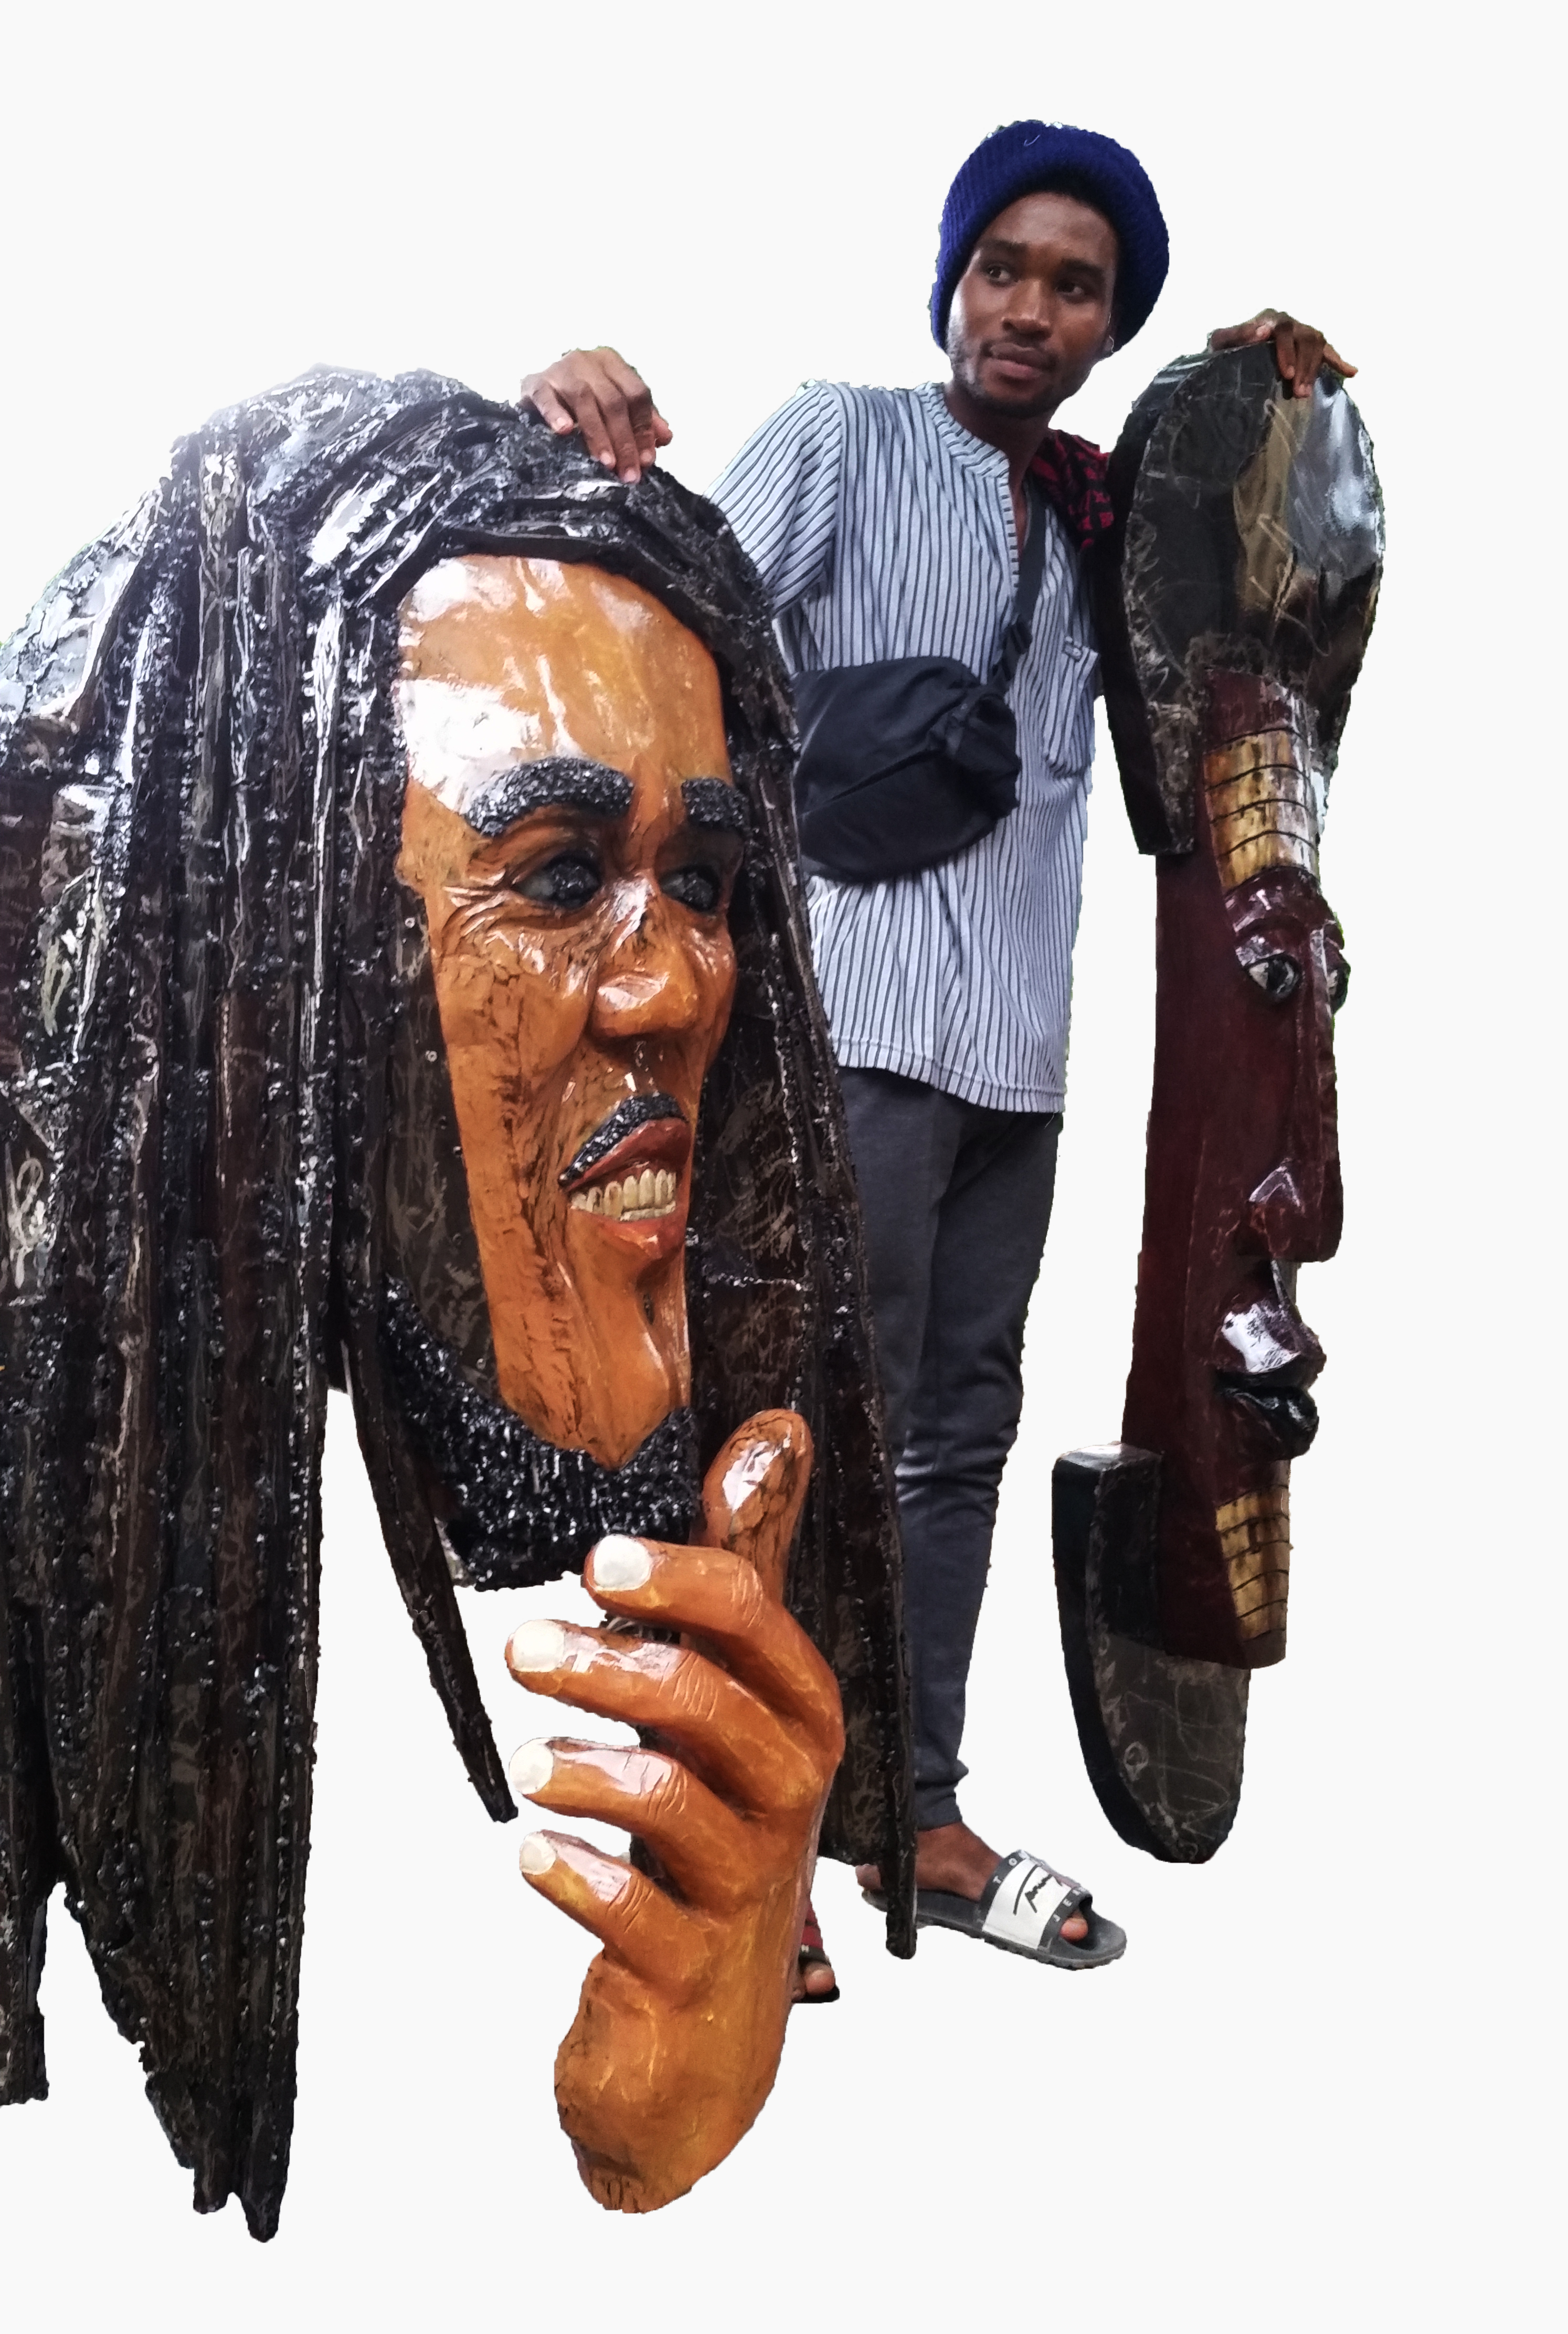 Jonathan Sonkola with two of his artworks: Bringing Back Memories (Bob Marley), 2019, wood and metal sheet, 135 x 89 x 17 cm, and My culture, (mask-like figure), 2019, wood and metal sheet, 66 x 18 x 7 cm.